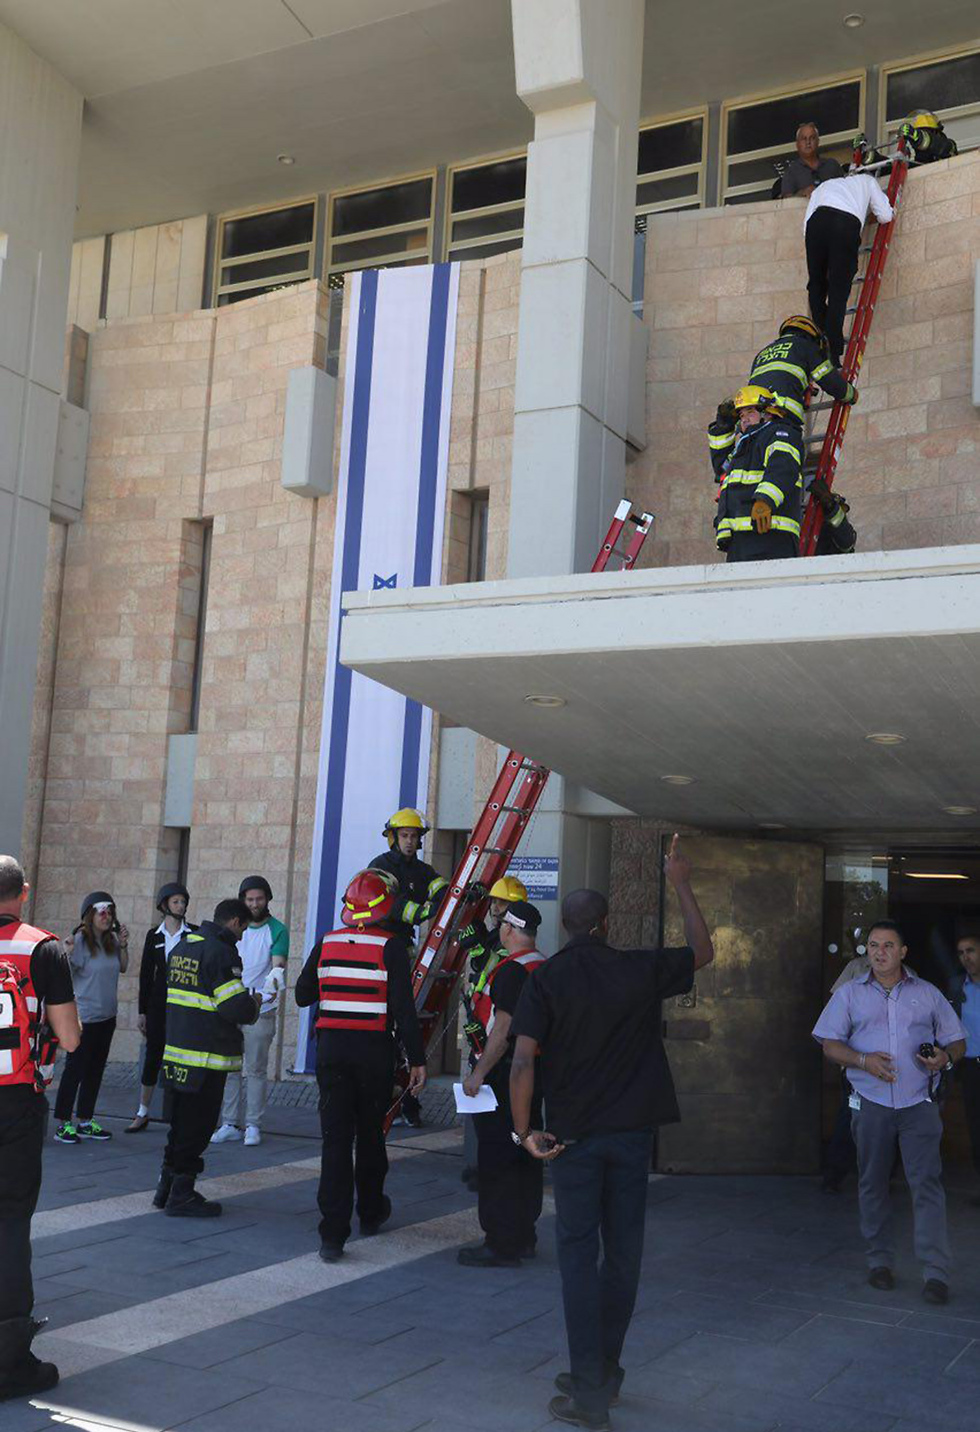 Earthquake drill at the Knesset (Photo: Yitzhak Harari, Knesset)